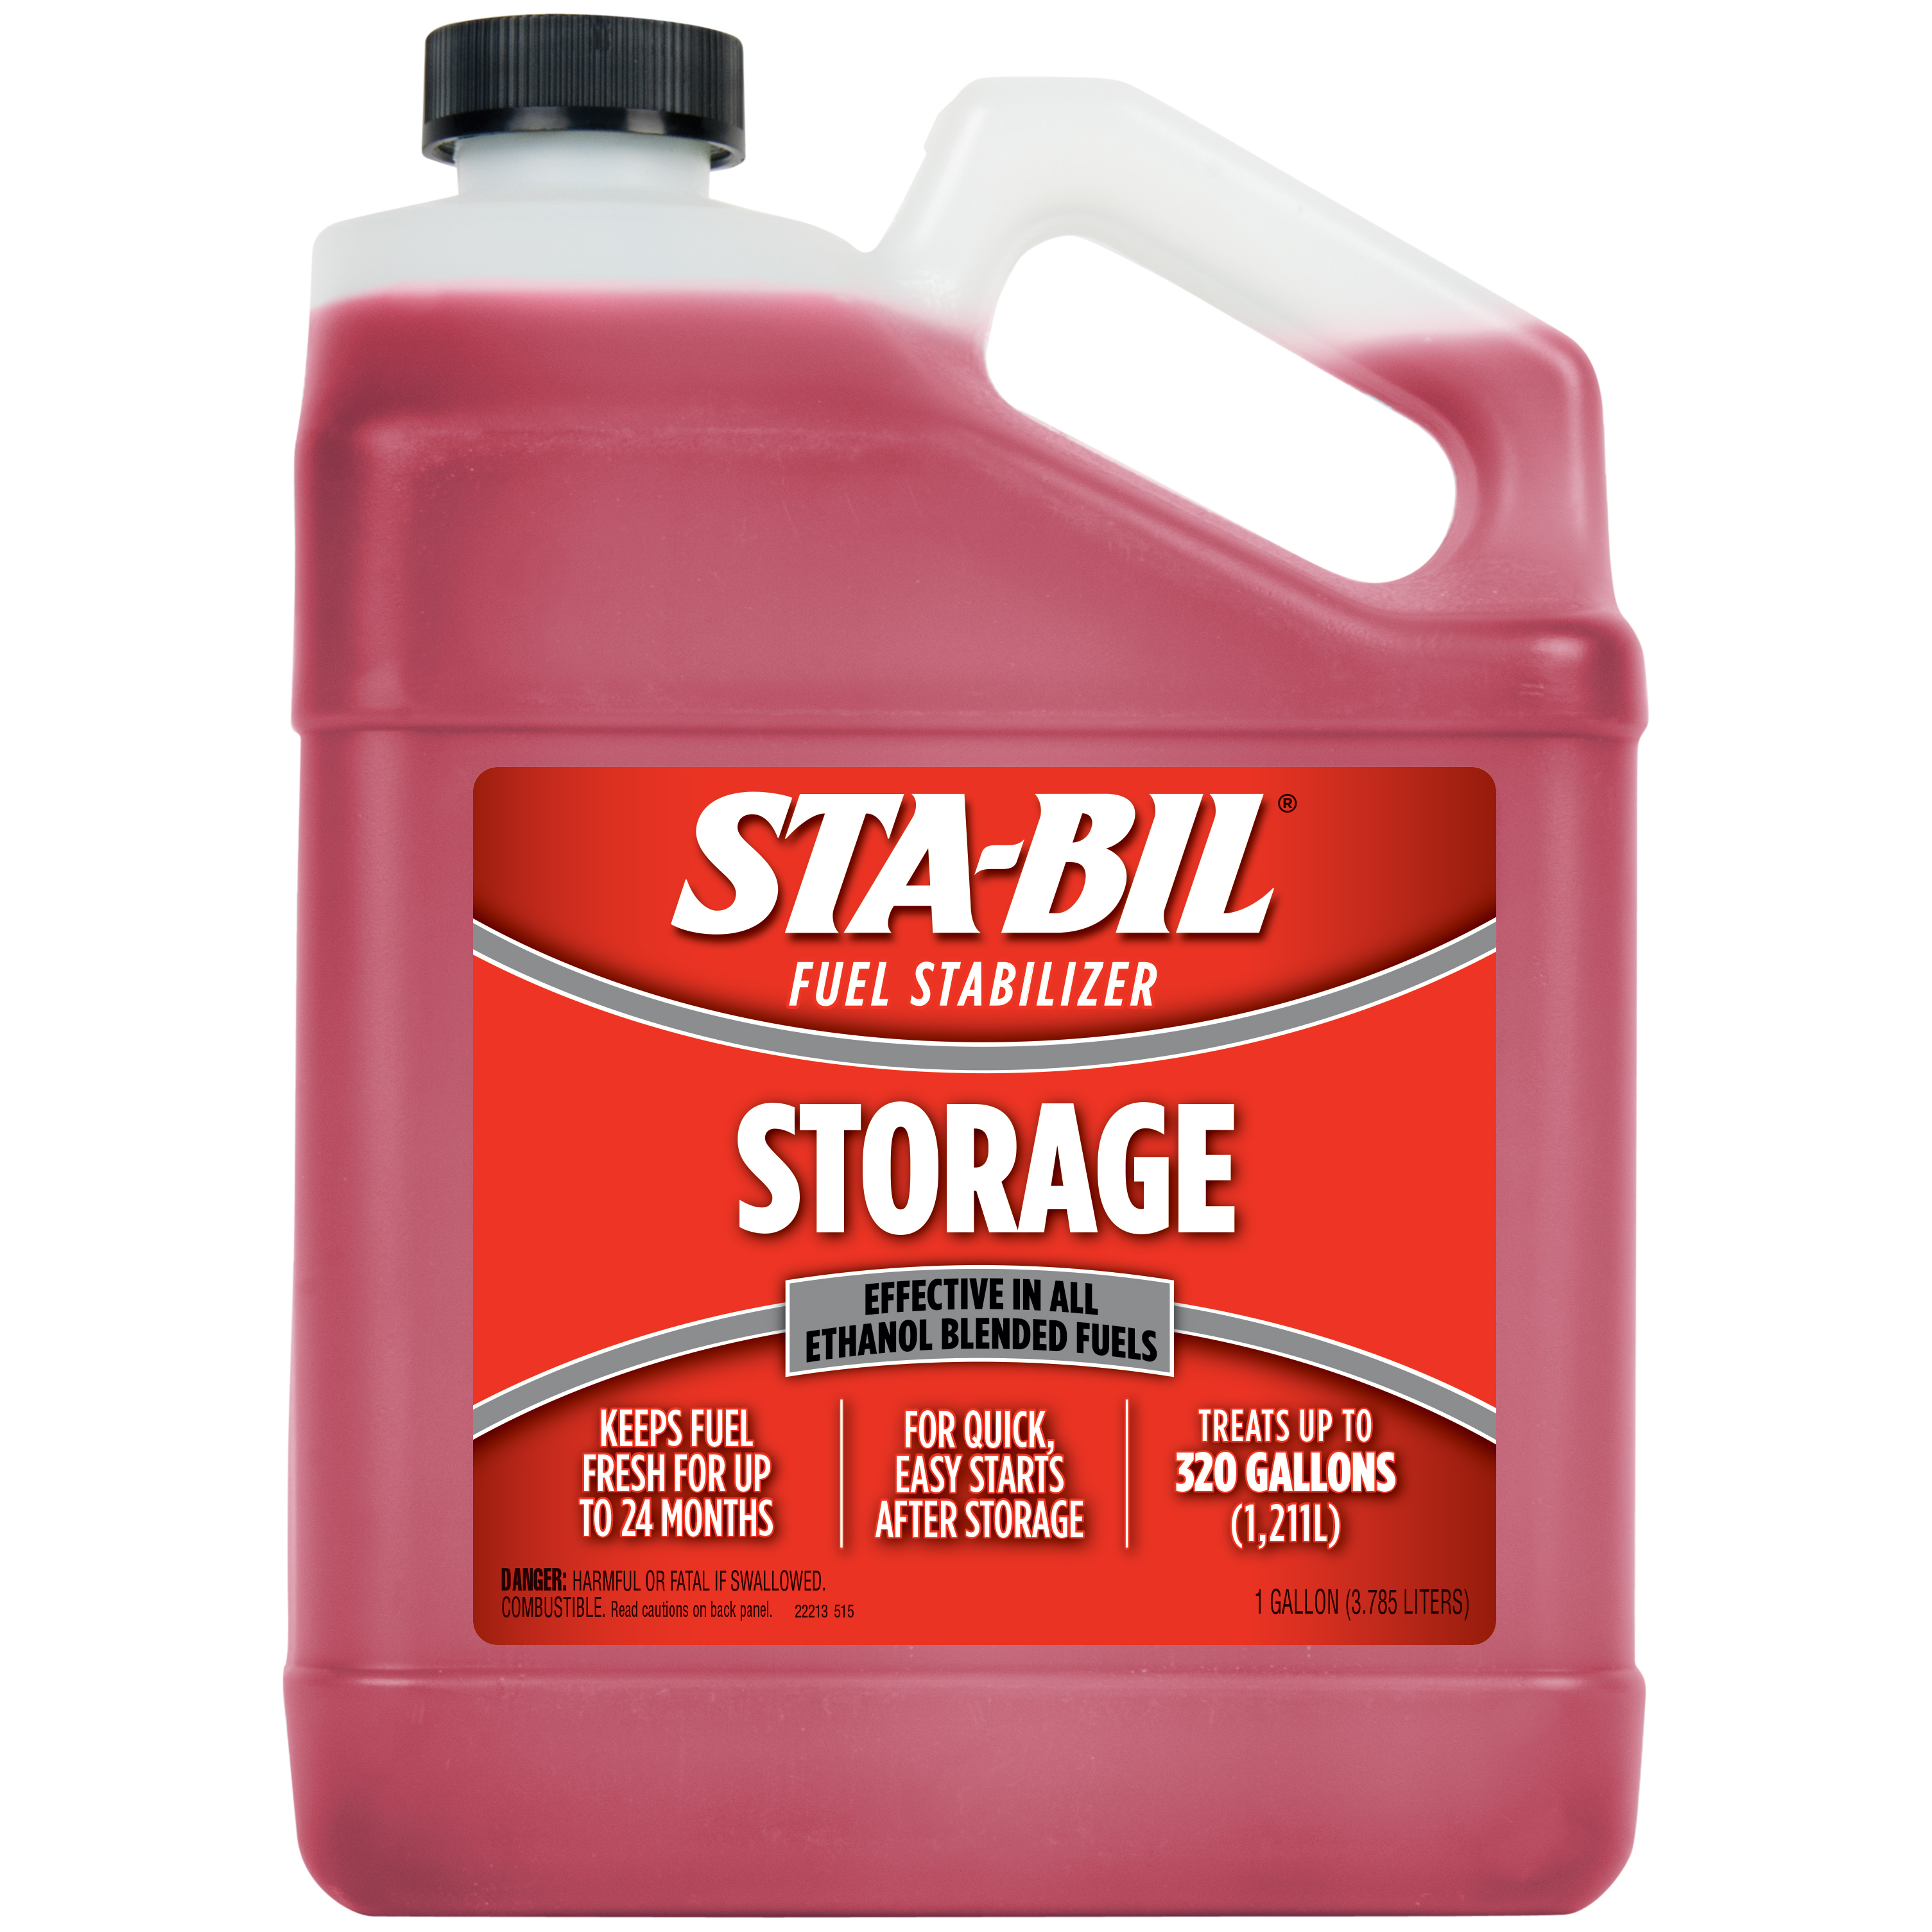 Sta Bil Fuel Stabilizer 1 Gallon On Clearance At Meijer Ymmv